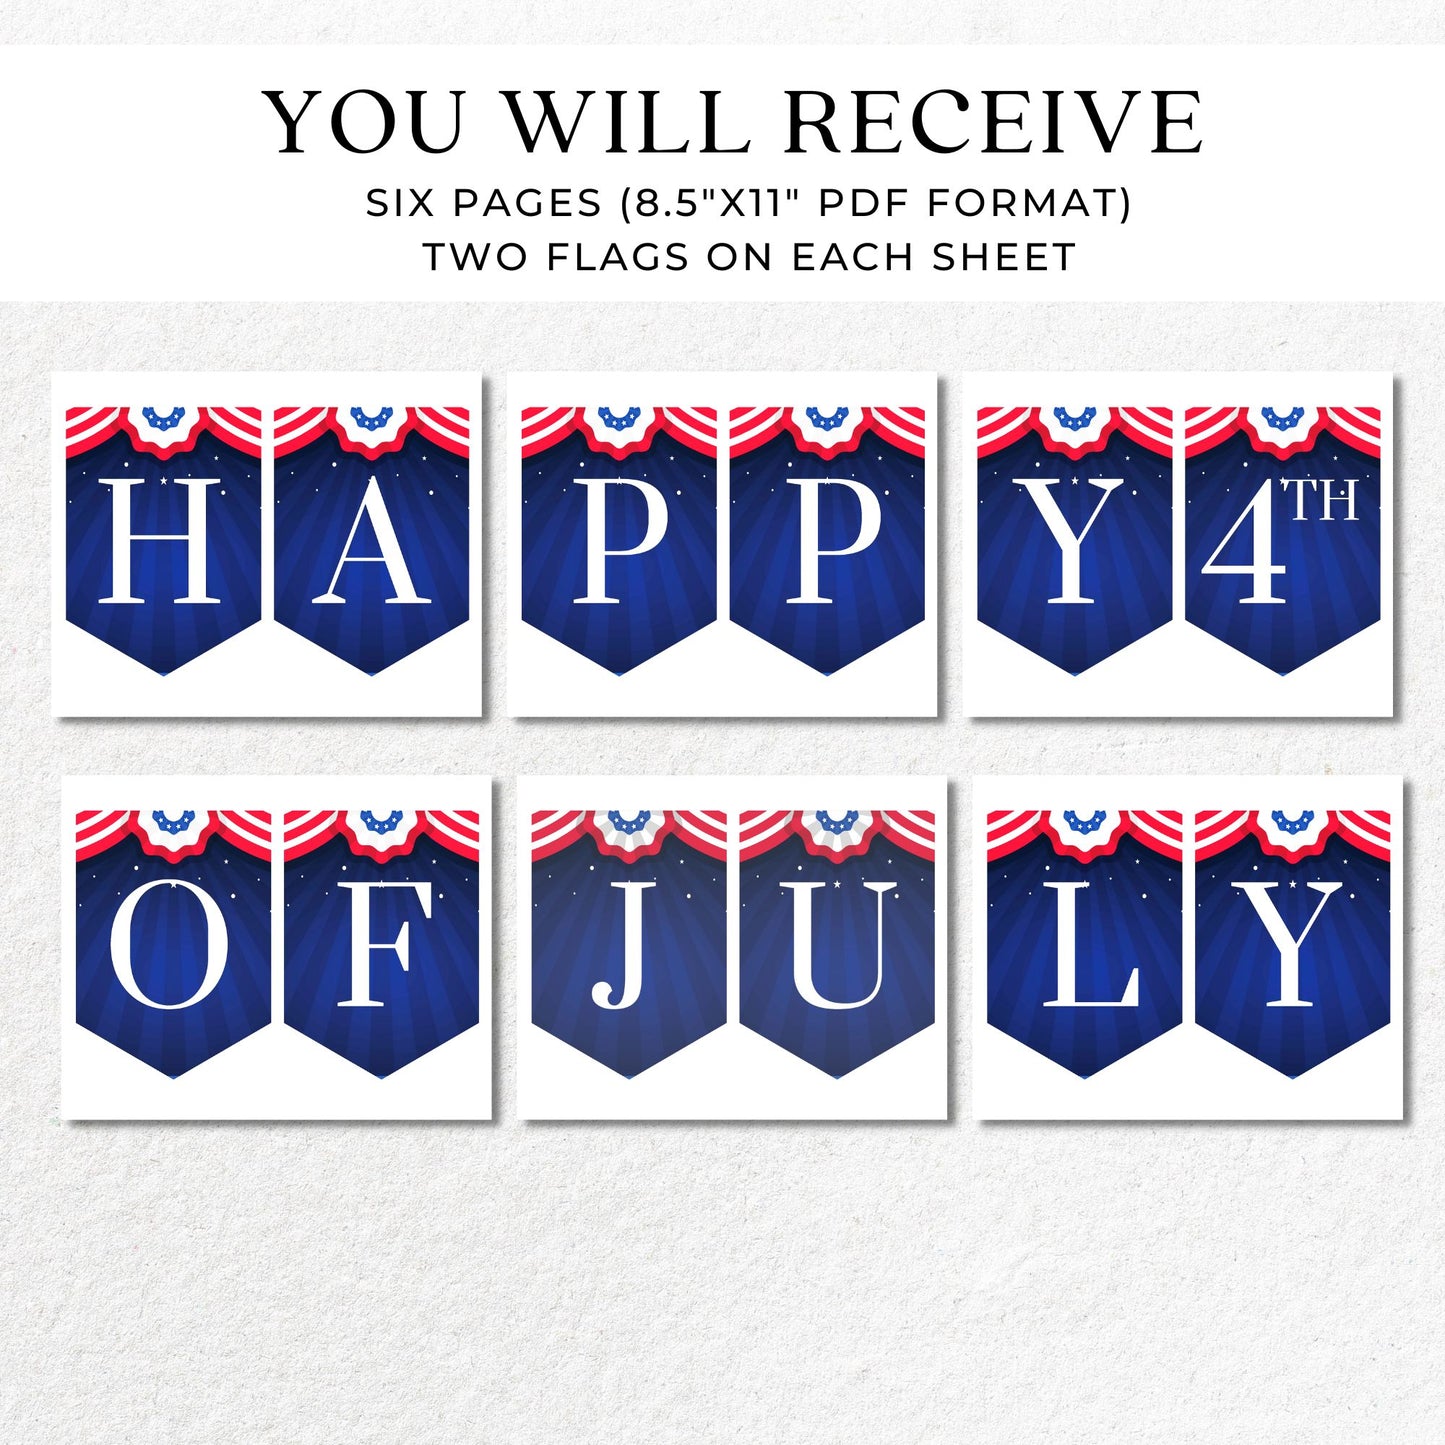 Happy 4th of July Banner PDF